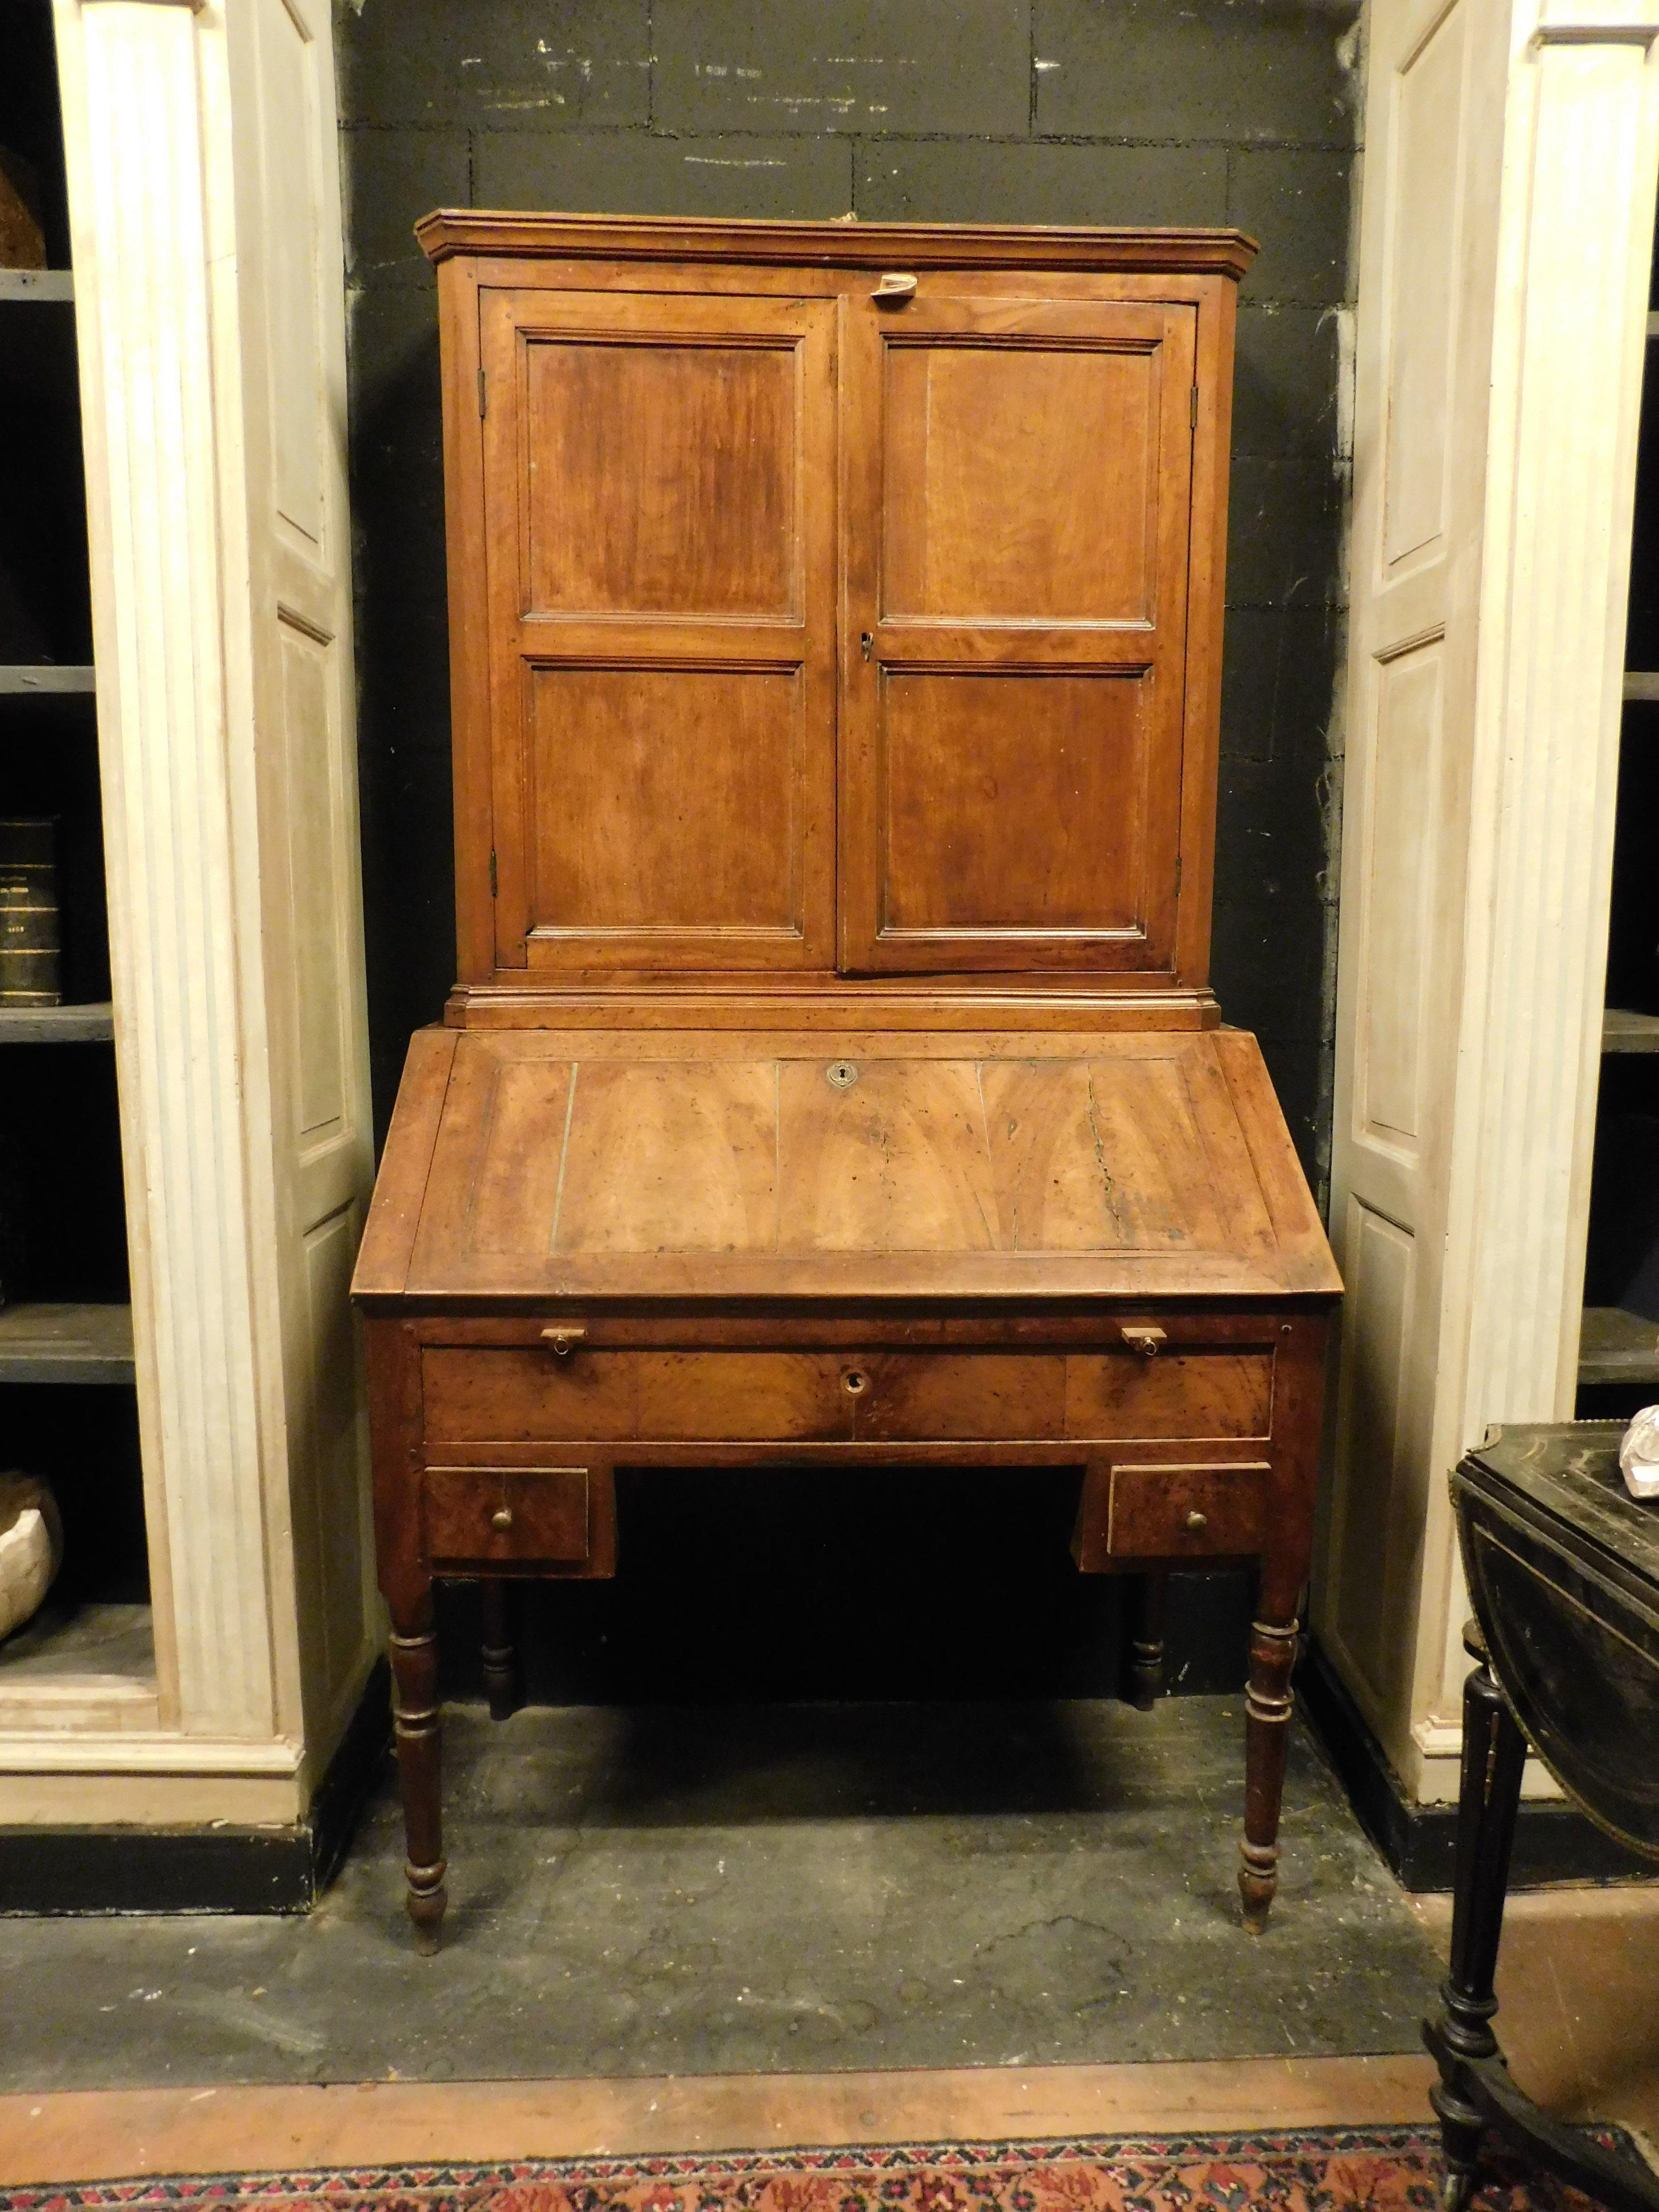 Antique cabinet with flap, walnut desk, upper storage unit with internal doors and drawers, turned legs and desk resting on extractable shelves. Complete with original internal drawers, very beautiful and storage piece of furniture, piece of